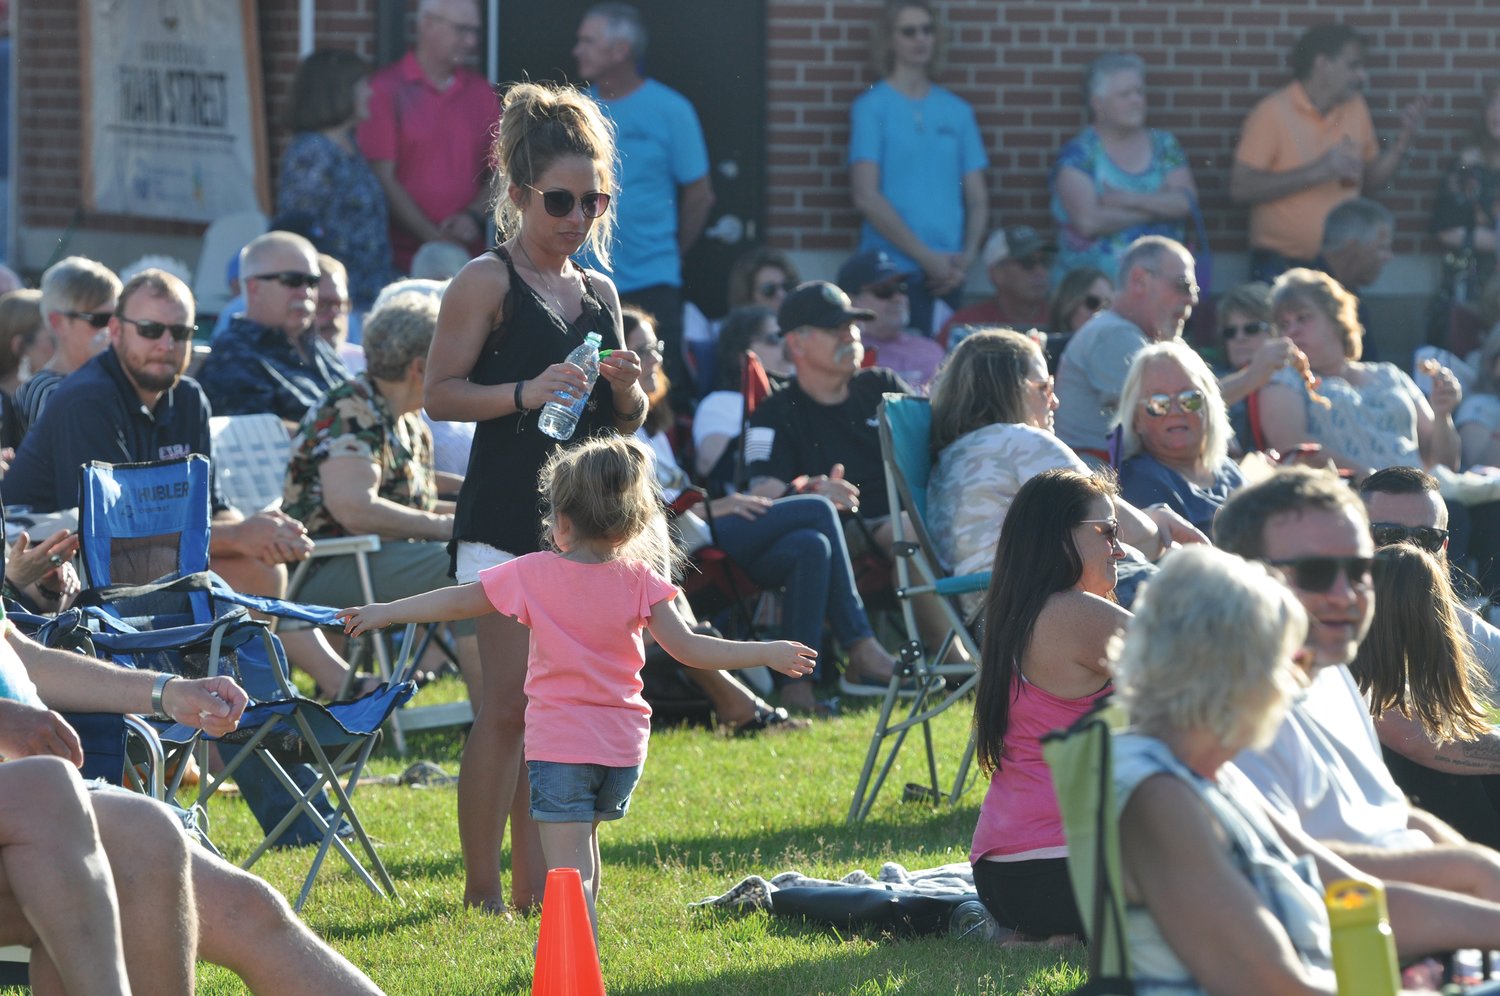 The crowd listens to the music during the kickoff of Crawfordsville Main Street's First Friday Concert Series.